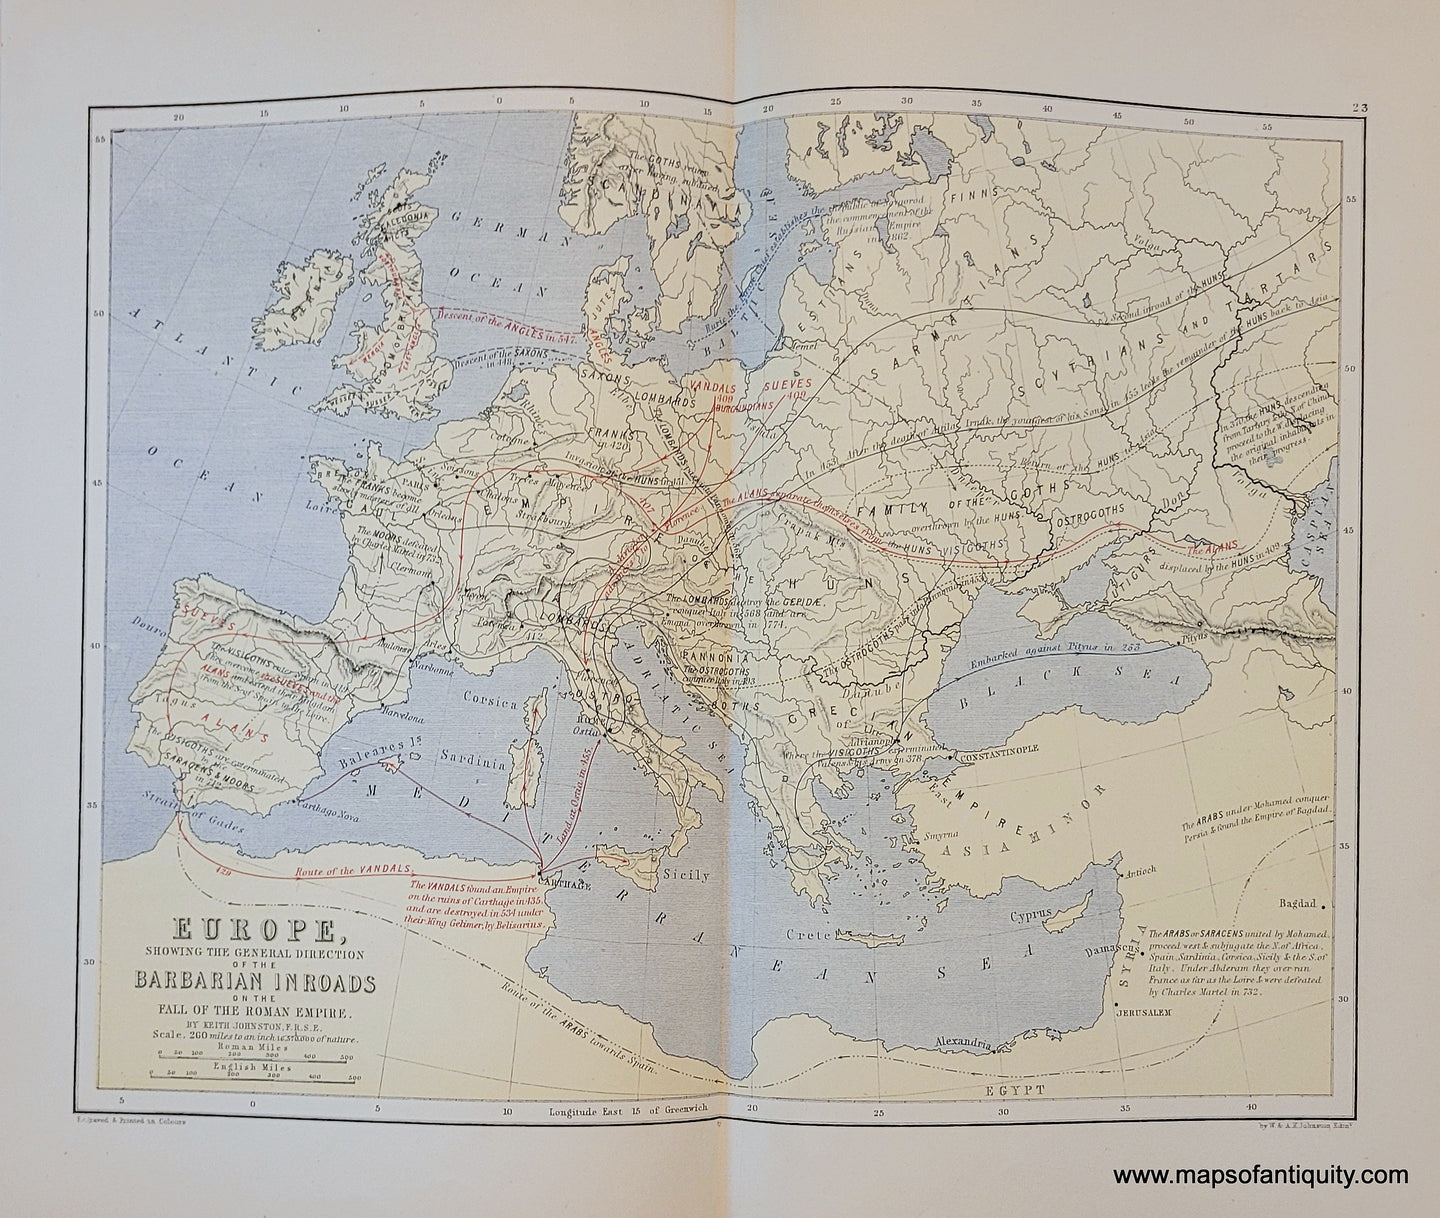 Genuine-Antique-Map-Europe-showing-the-general-direction-of-the-Barbarian-inroads-on-the-fall-of-the-Roman-Empire-1910-Johnston-Maps-Of-Antiquity